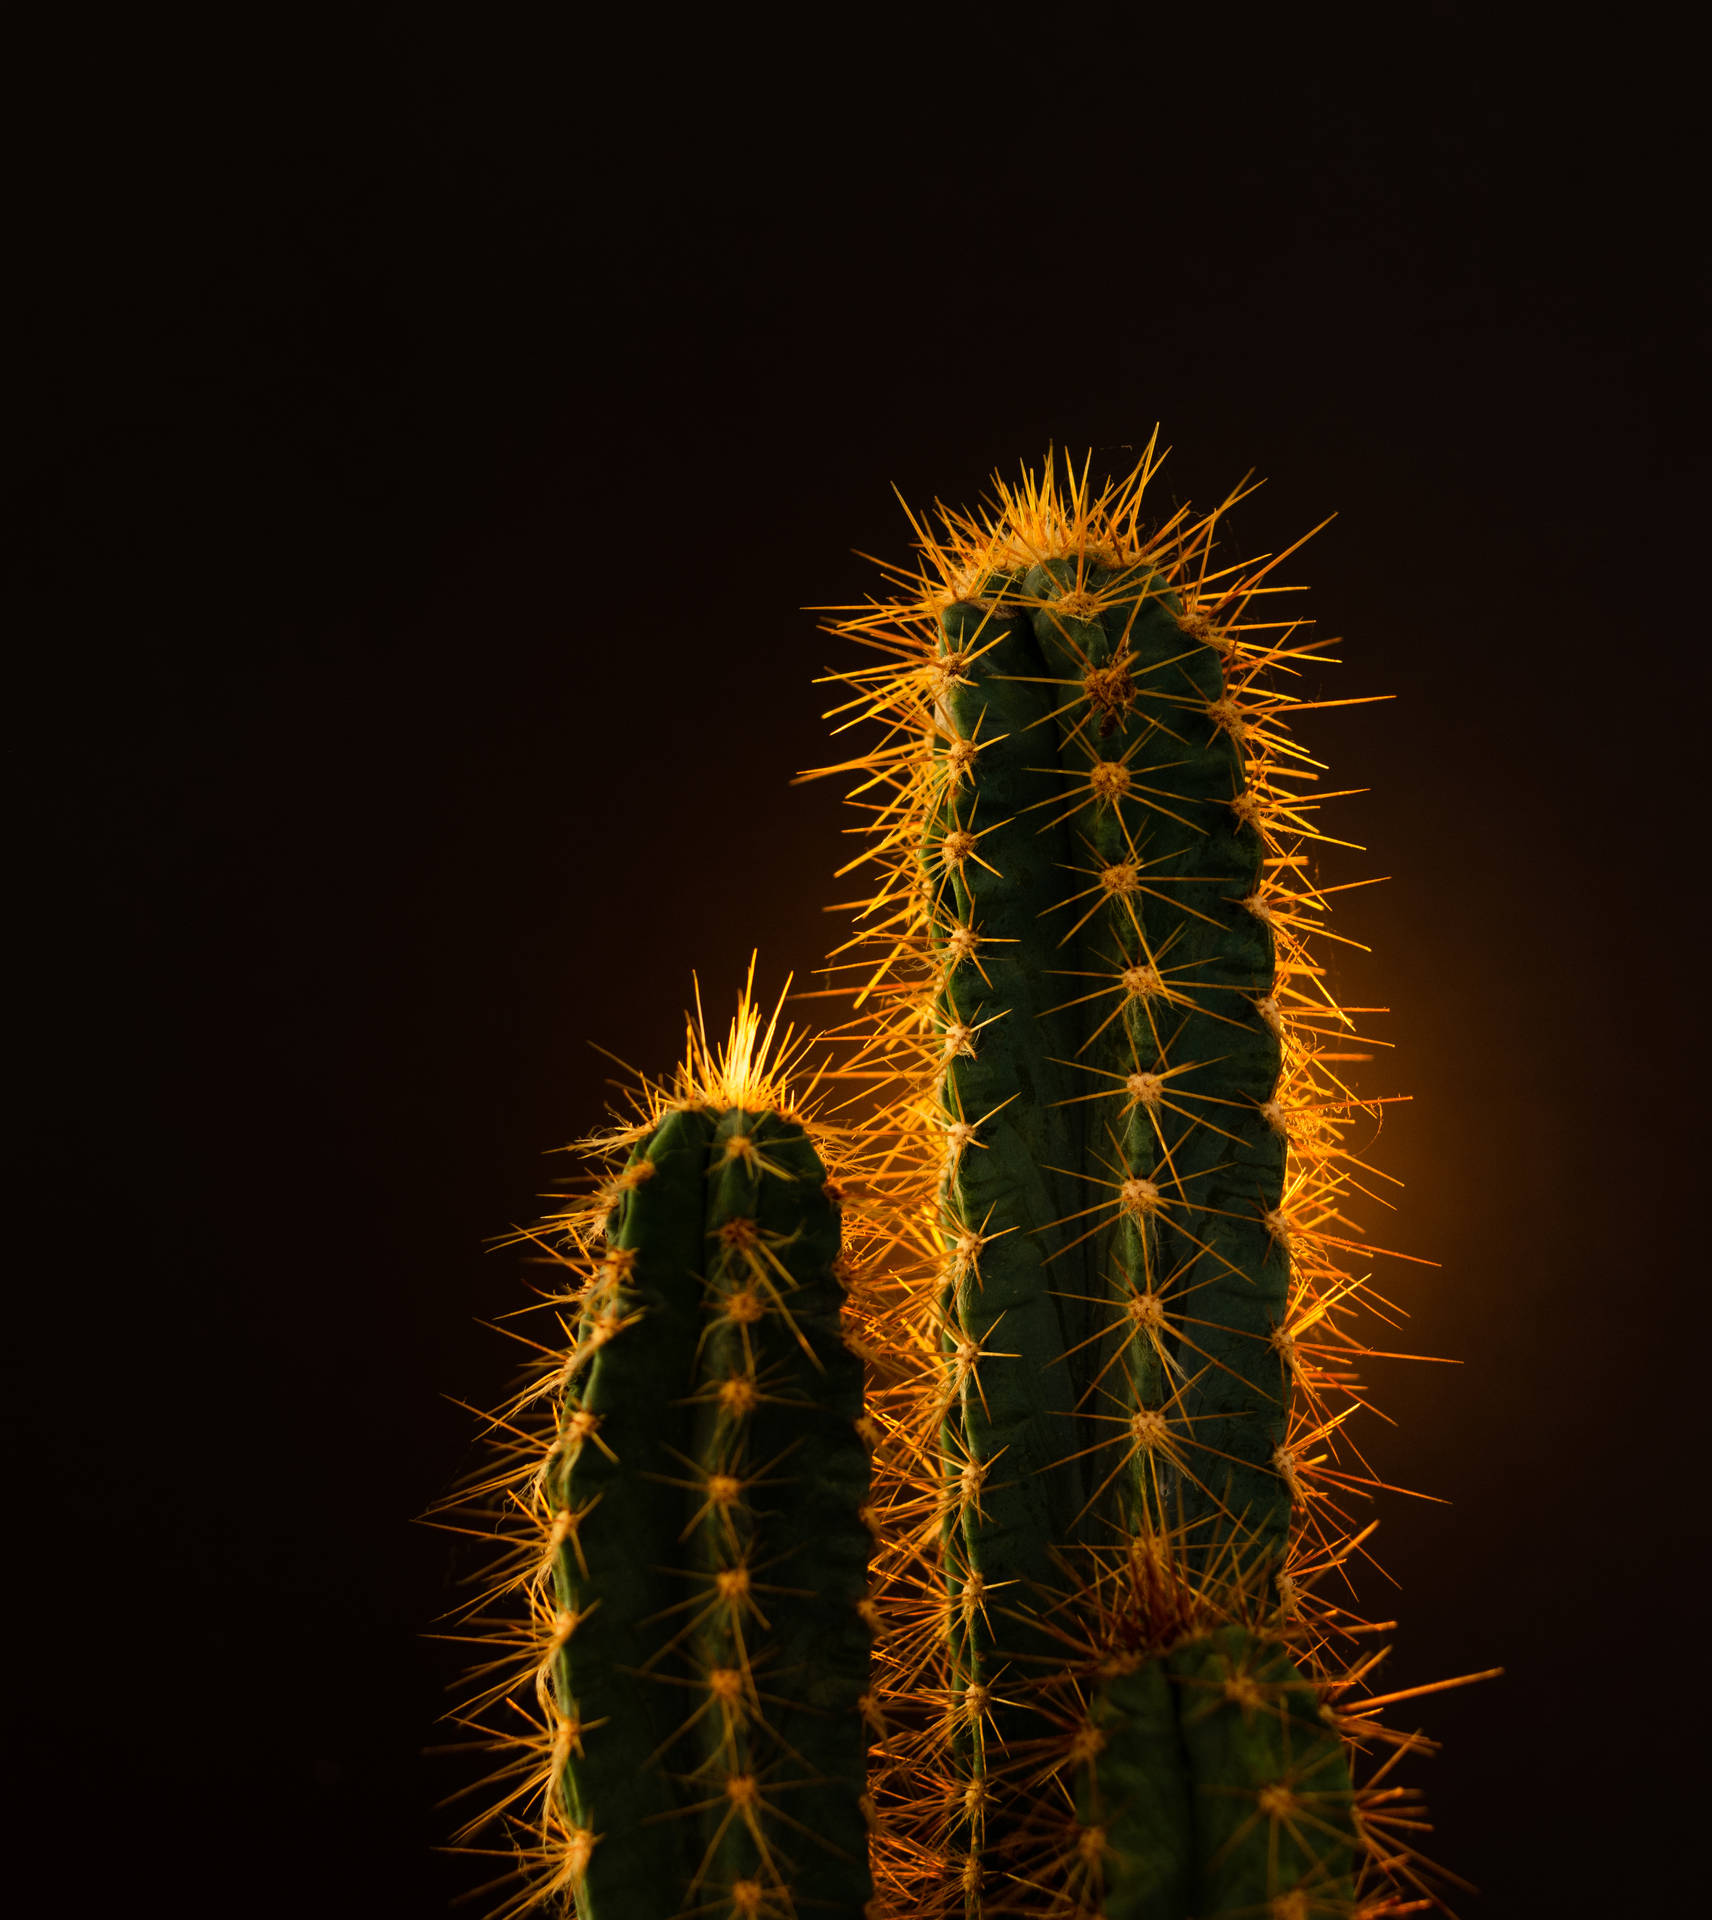 Cactus 3292X3692 Wallpaper and Background Image